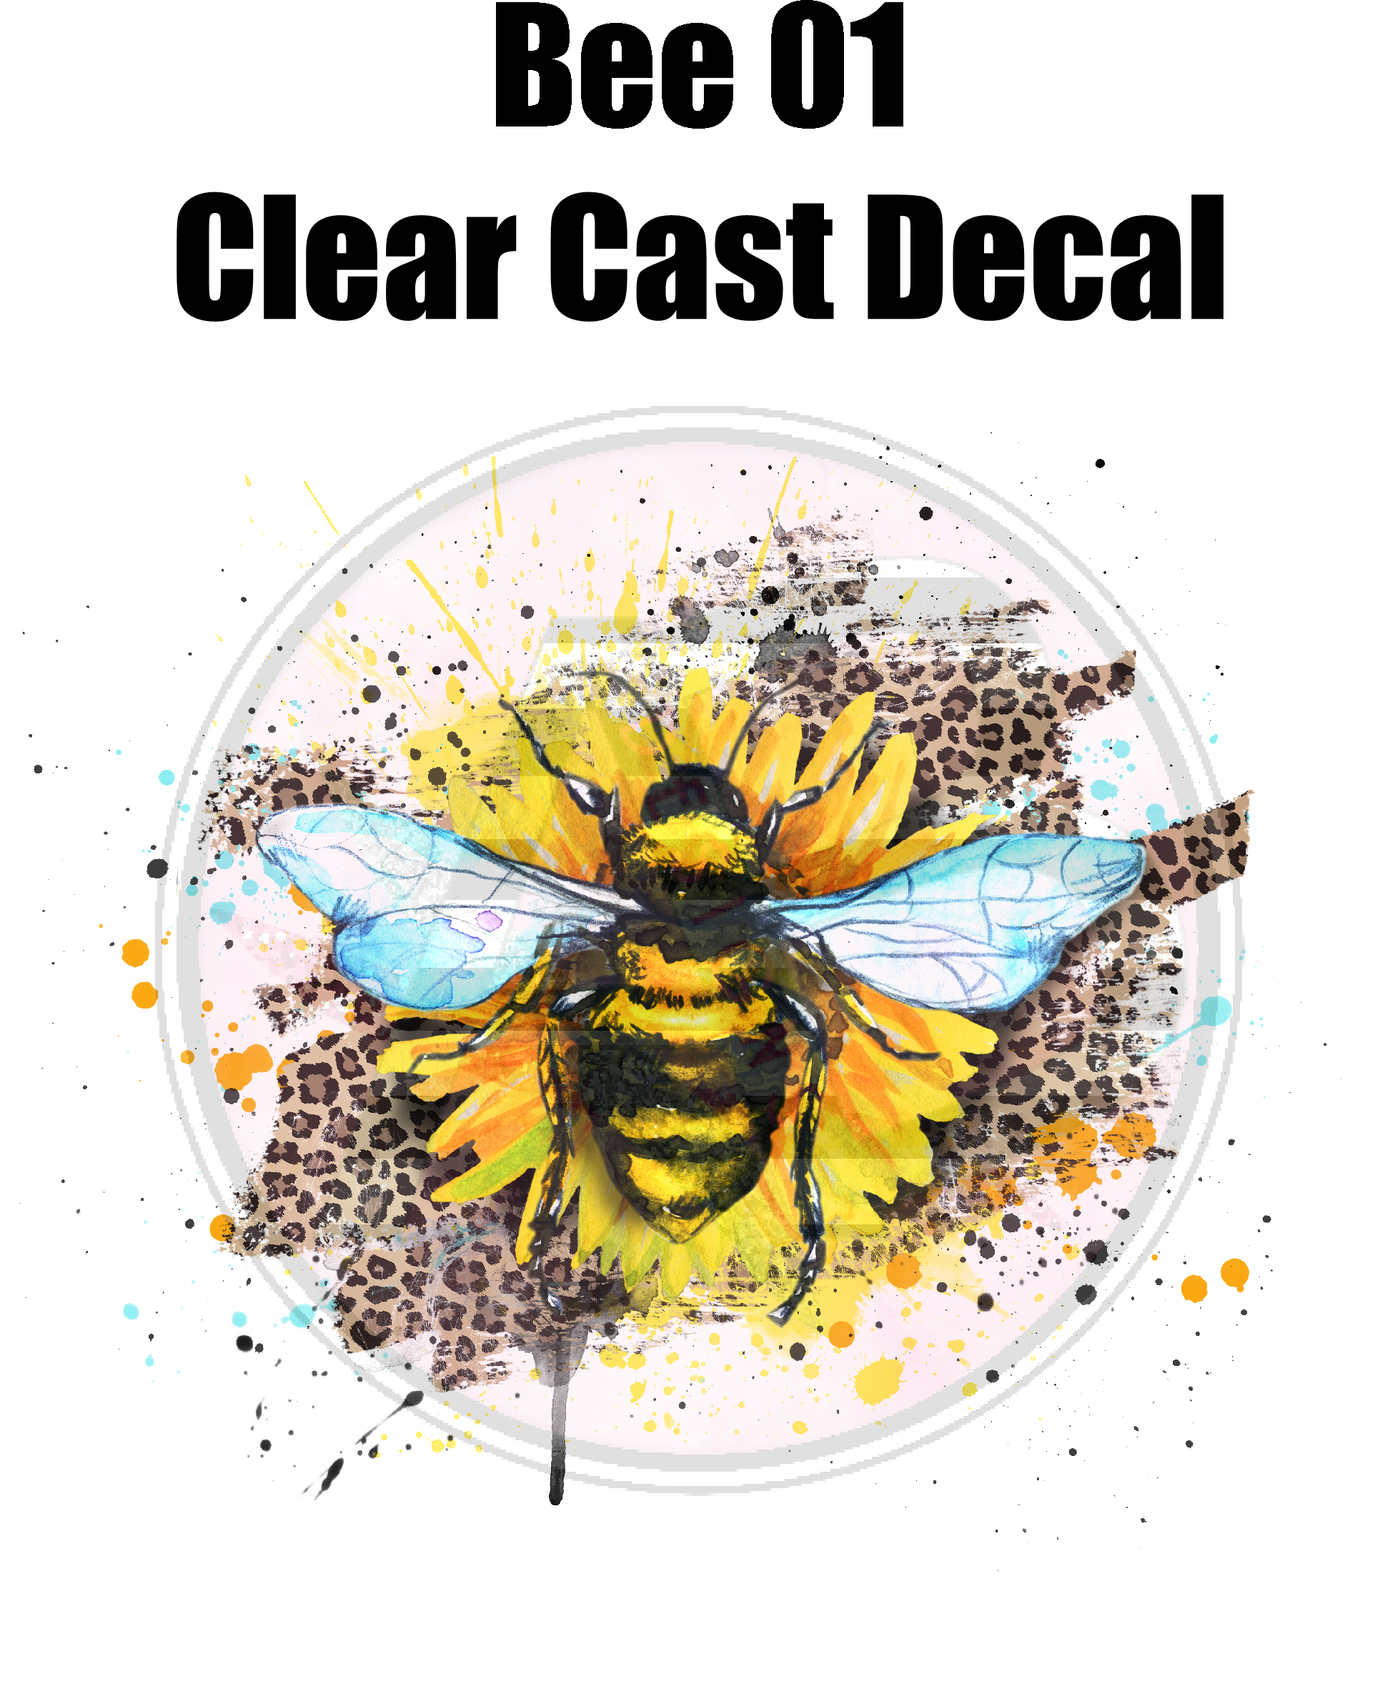 Bee 01 Clear Cast Decal